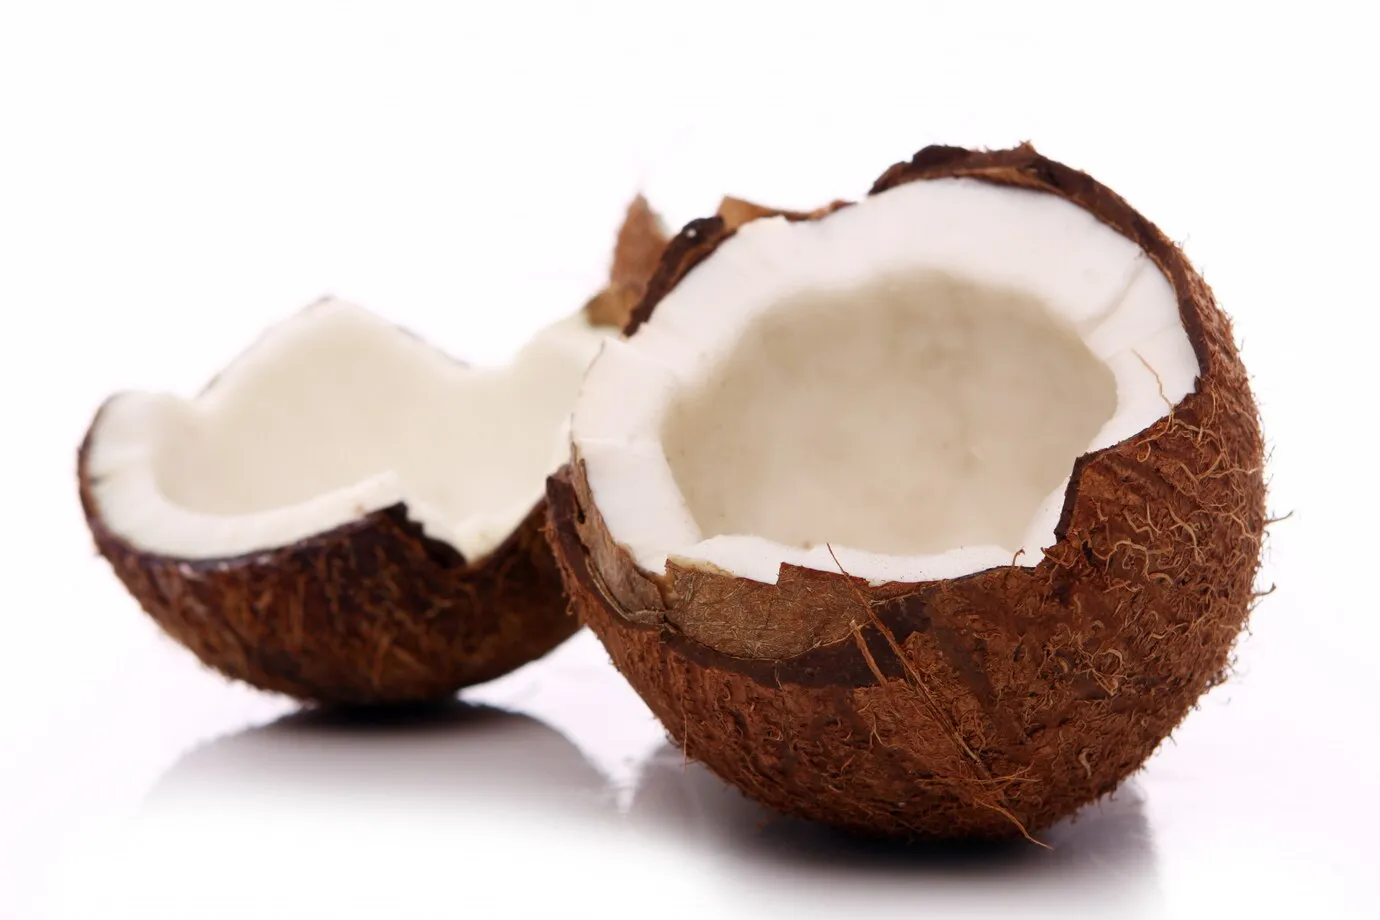 A close-up of a coconut on a white background, showing the coconut's brown husk and white meat.